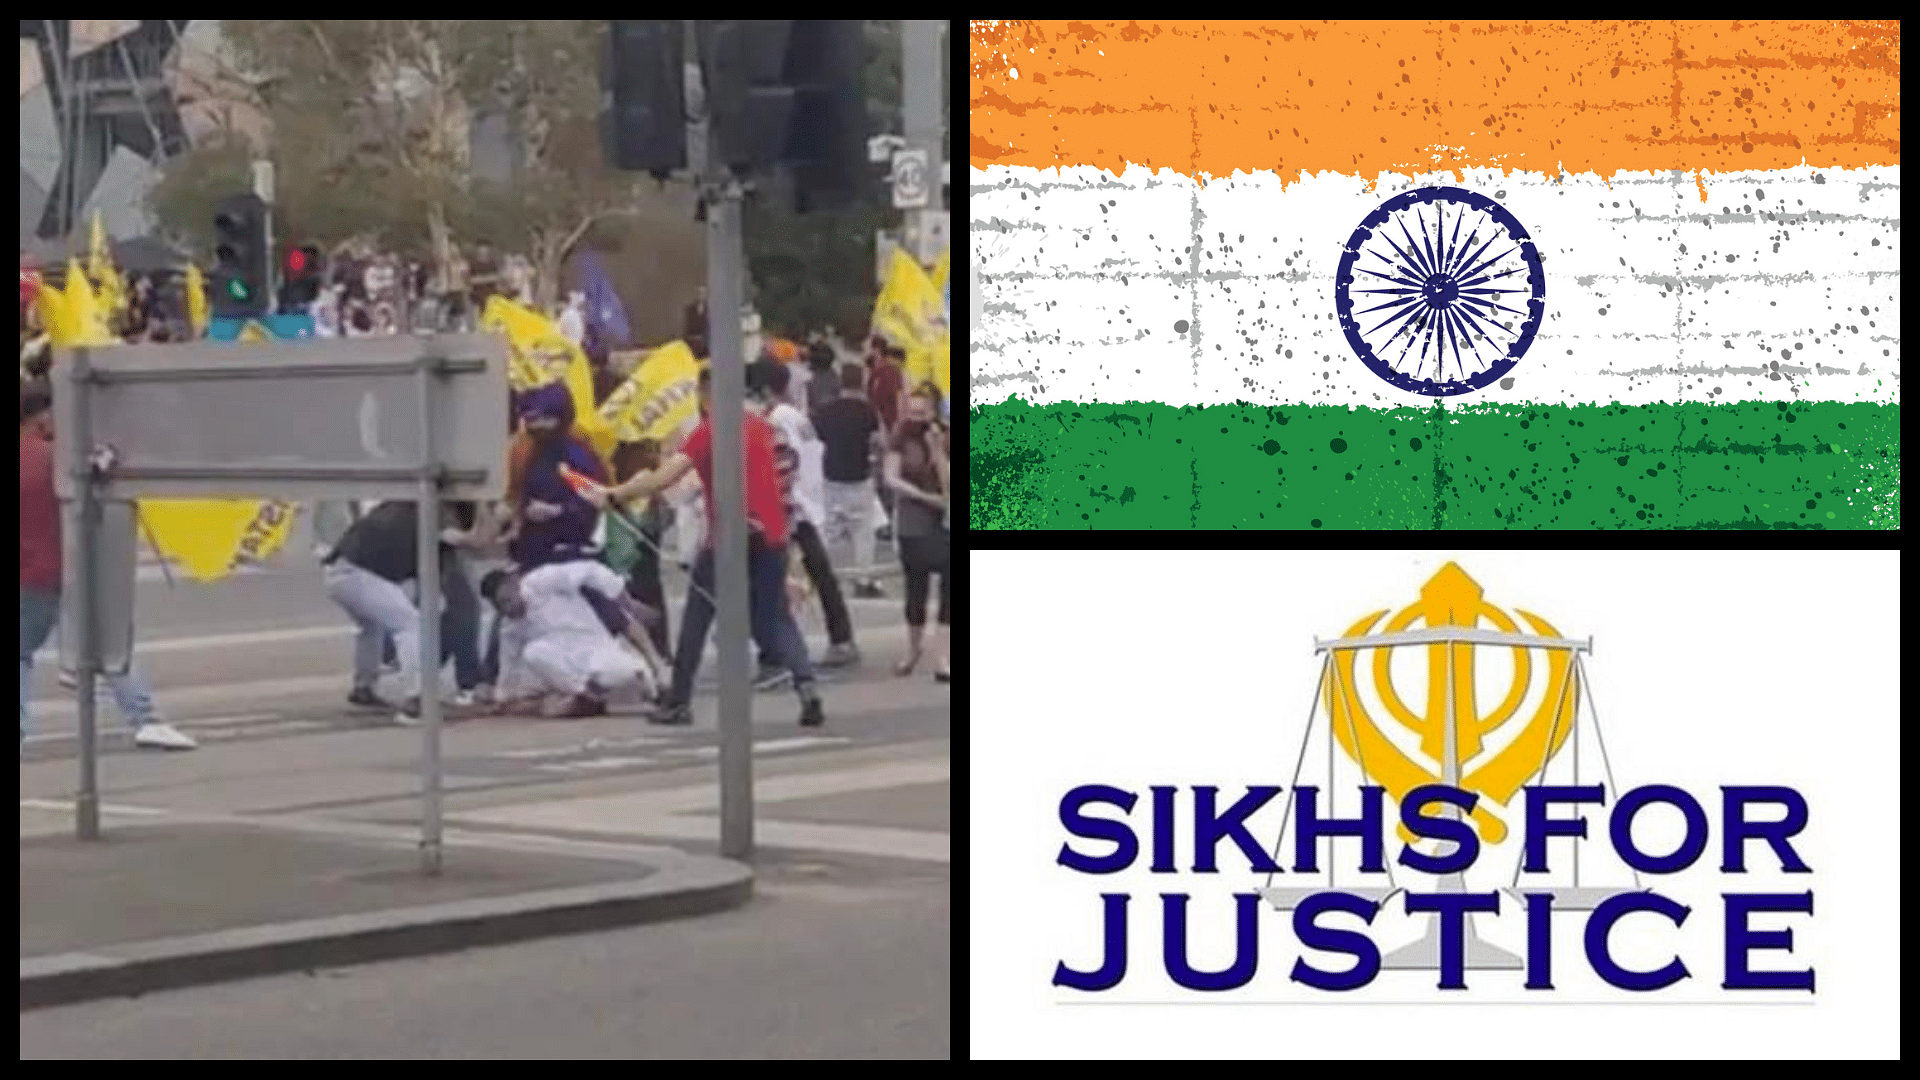 <div class="paragraphs"><p>The Khalistan supporters clashed with people carrying the Indian flag who were opposing the <a href="https://www.thequint.com/explainers/referendum-2020-khalistan-separatist-campaign-punjab">Khalistan Referendum</a> event.</p></div>